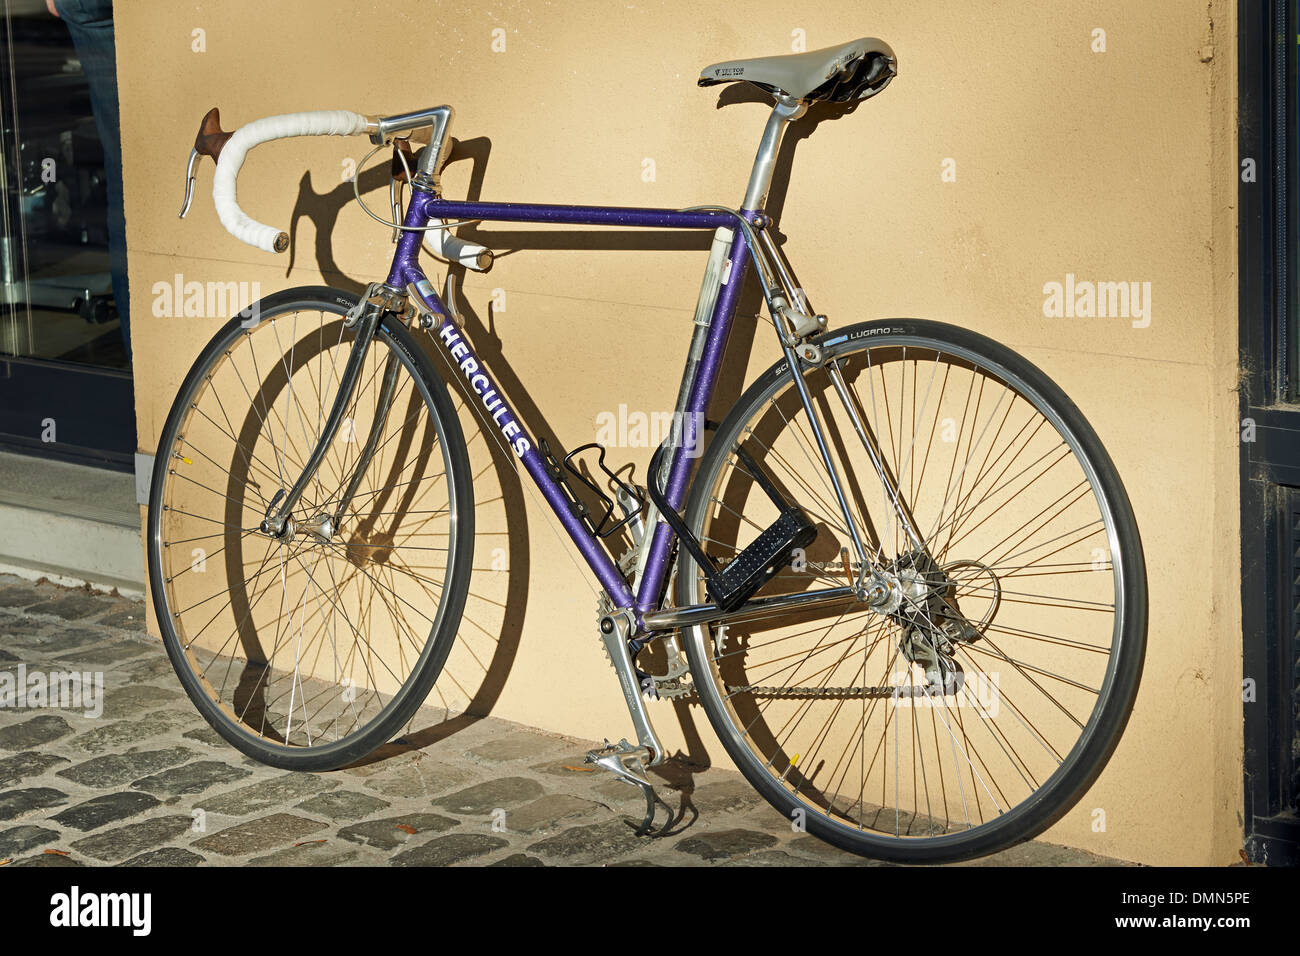 Racing bicycle parked with lock Stock Photo